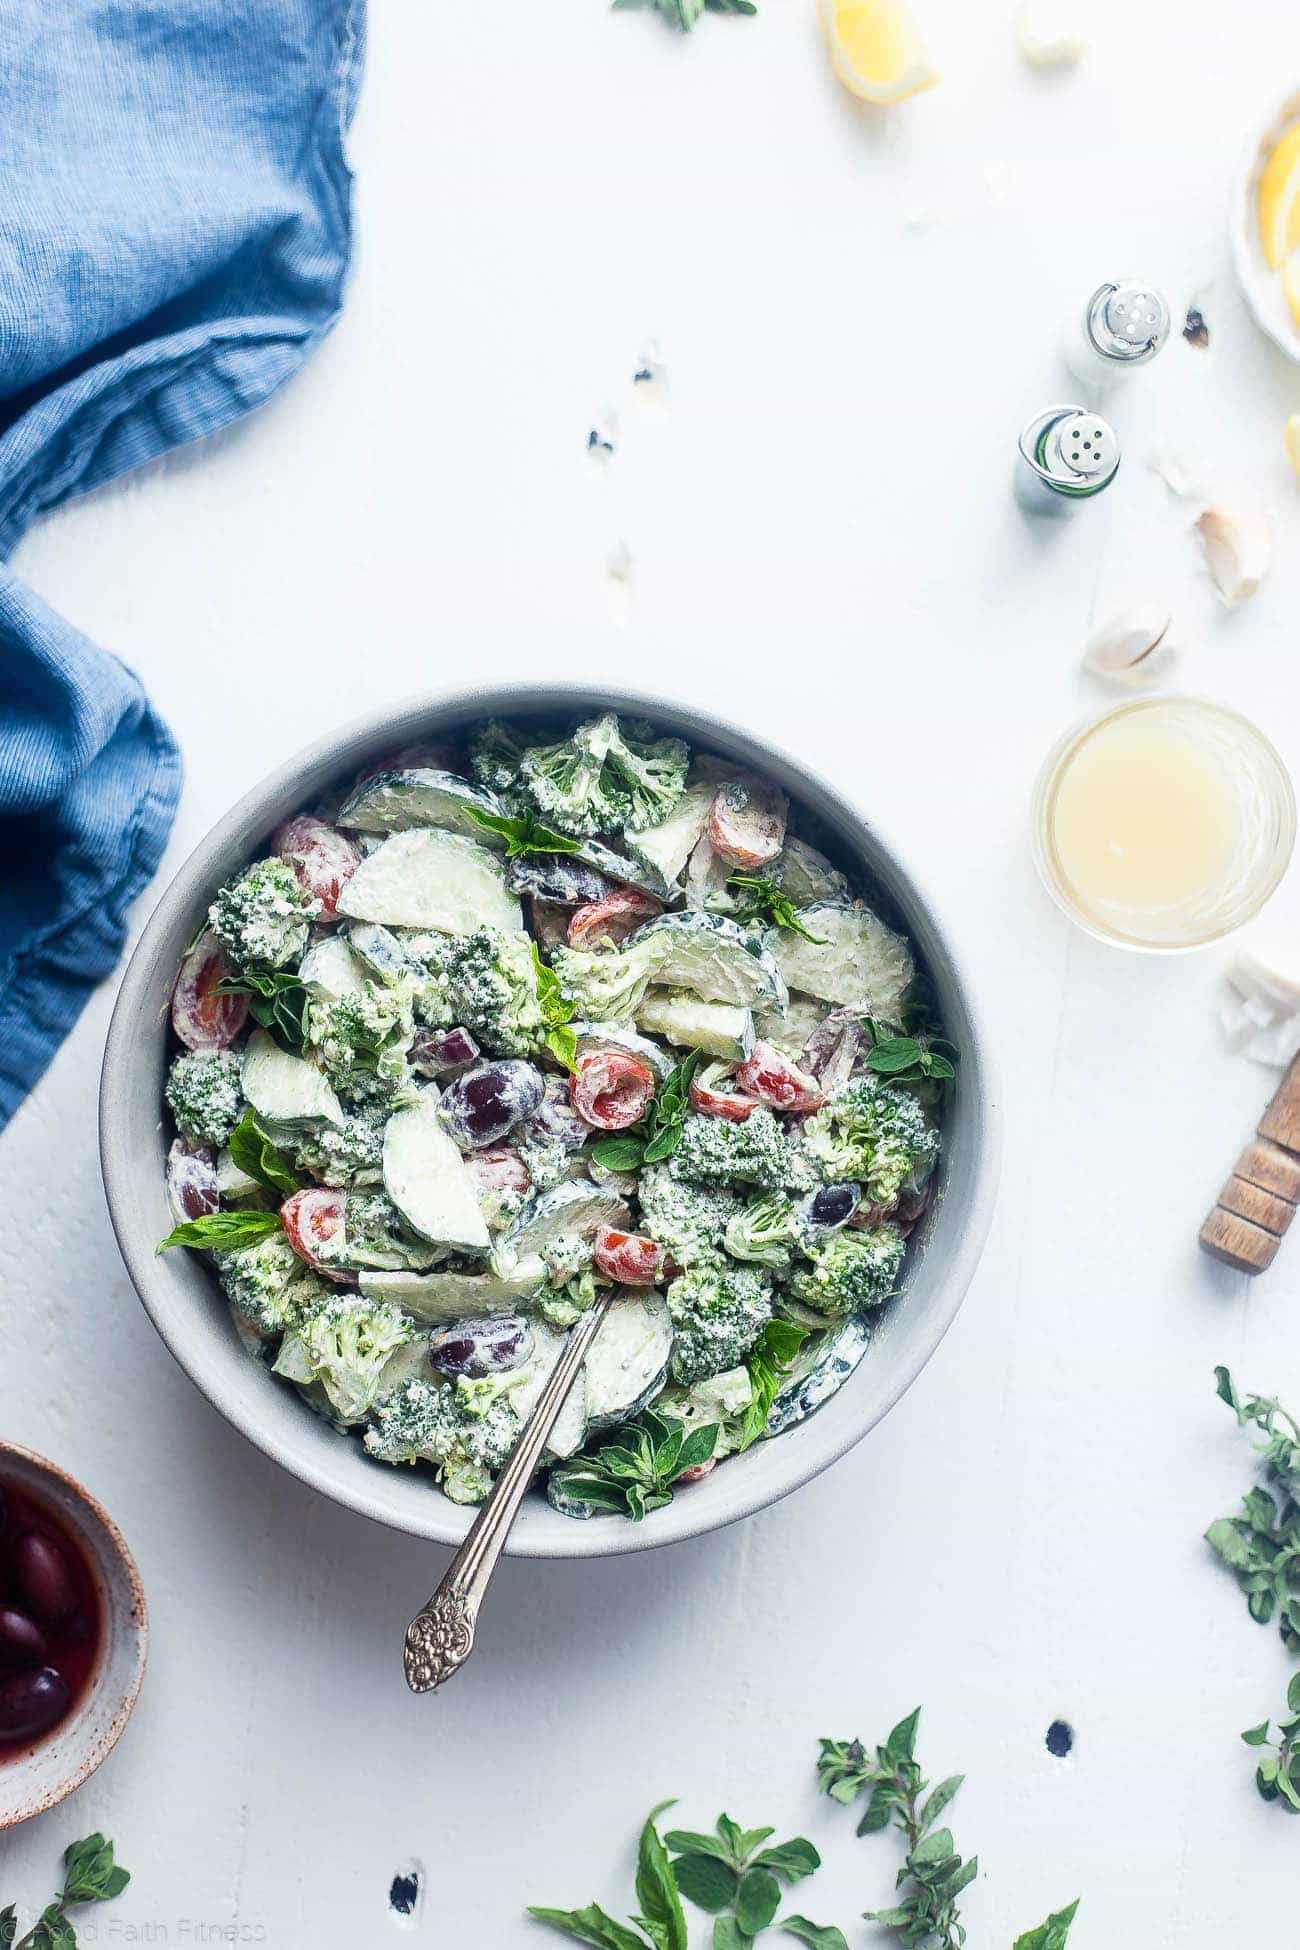 Greek Low Carb Broccoli Salad - This low carb, raw broccoli salad is so creamy you'll never know it's vegan, paleo and whole30 compliant! It's an easy side dish that's perfect for spring potlucks! | Foodfaithfitness.com | @FoodFaithFit